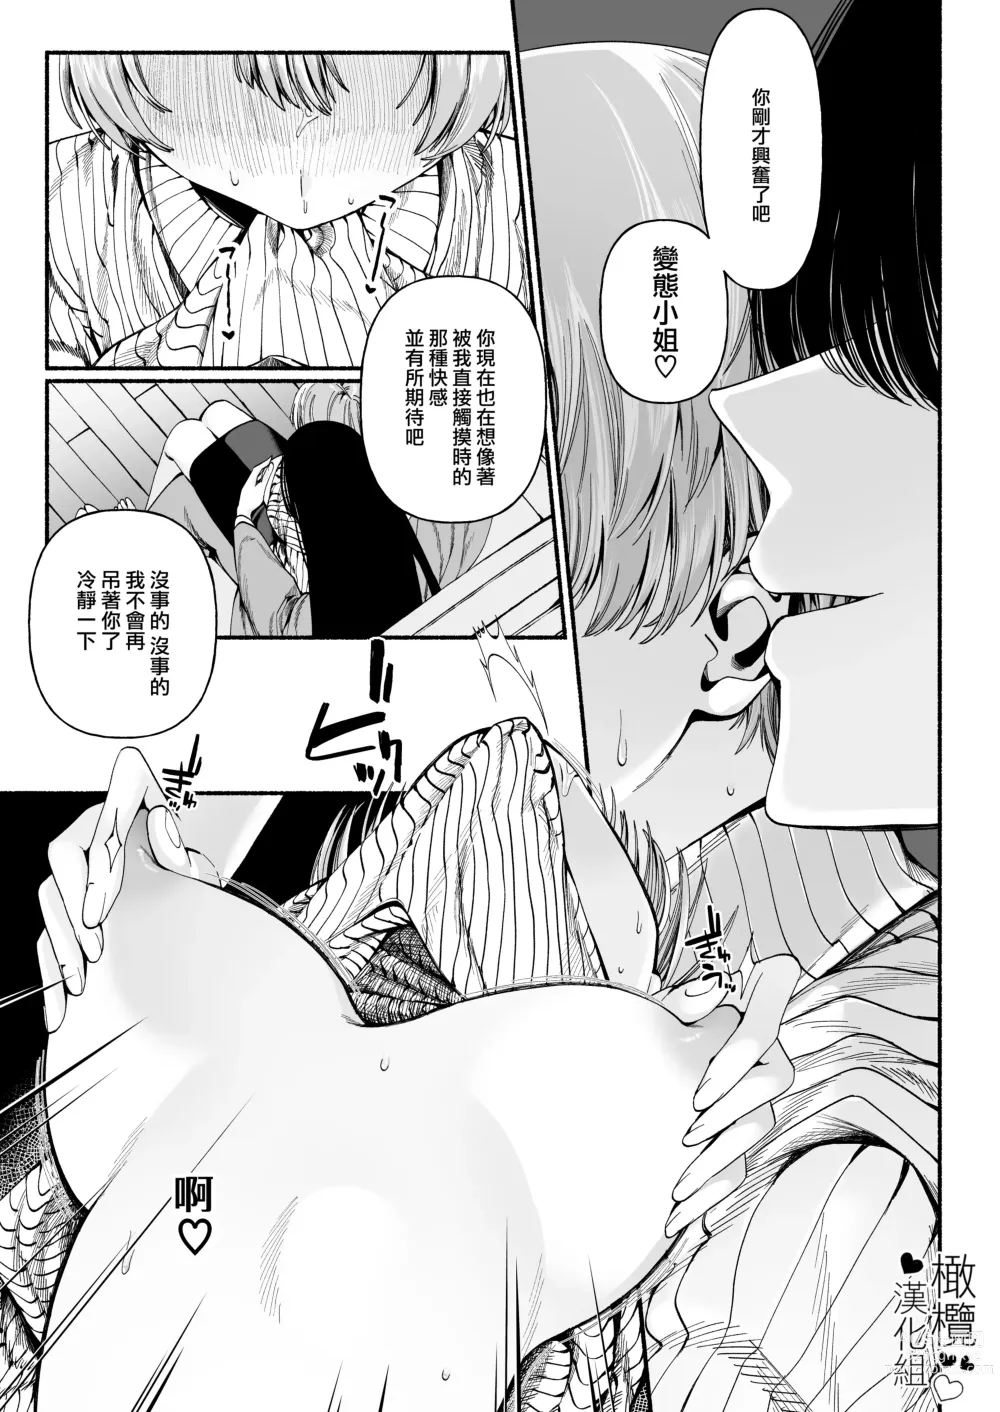 Page 13 of doujinshi 因報春鳥已死